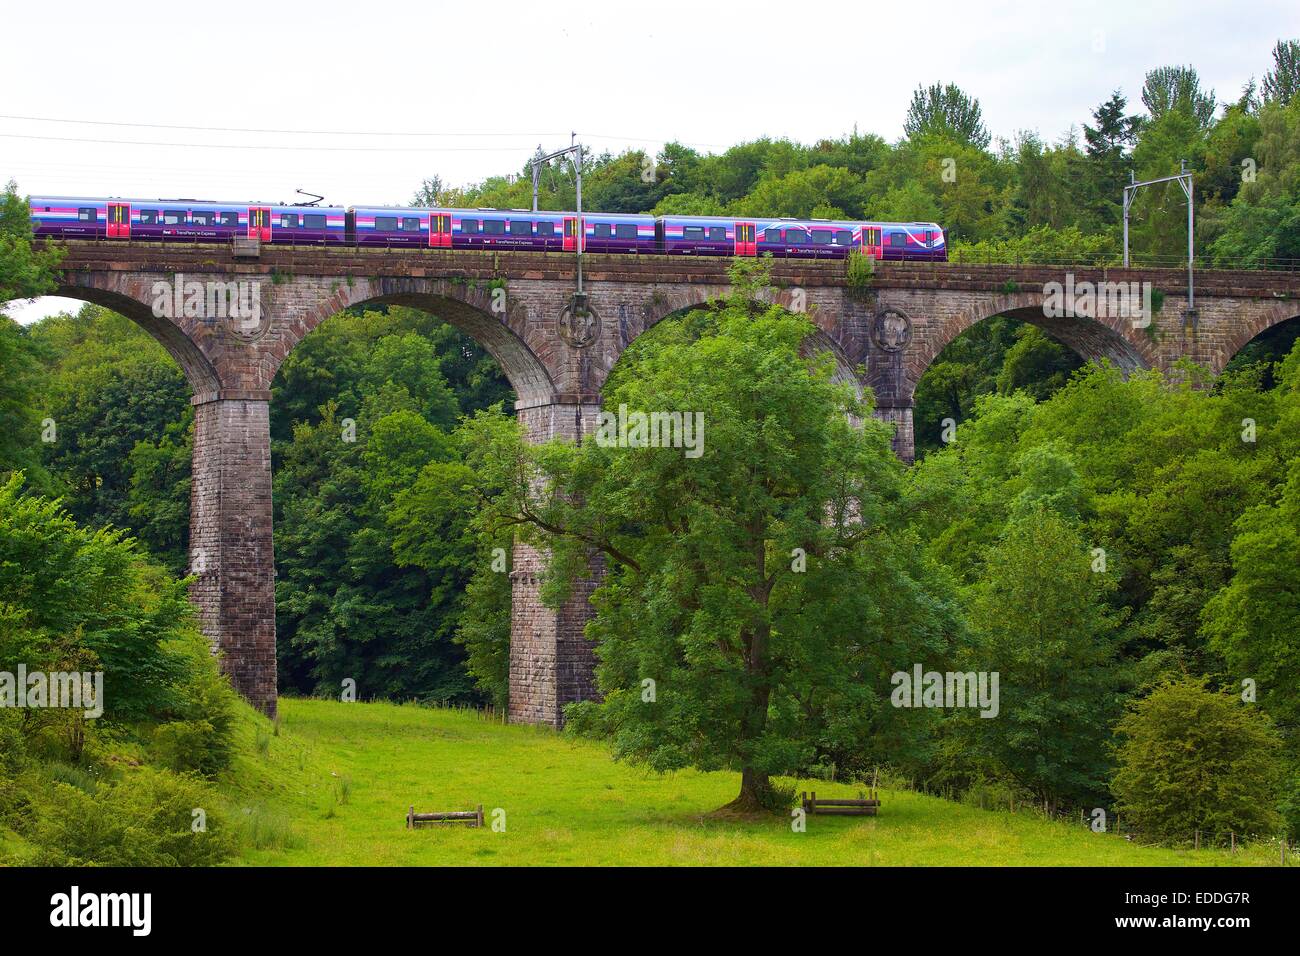 First Group Trans Pennine Express, Class 185 train passing over Hugh's Crag Viaduct near Penrith, Cumbria, West Coast Main Line, Stock Photo